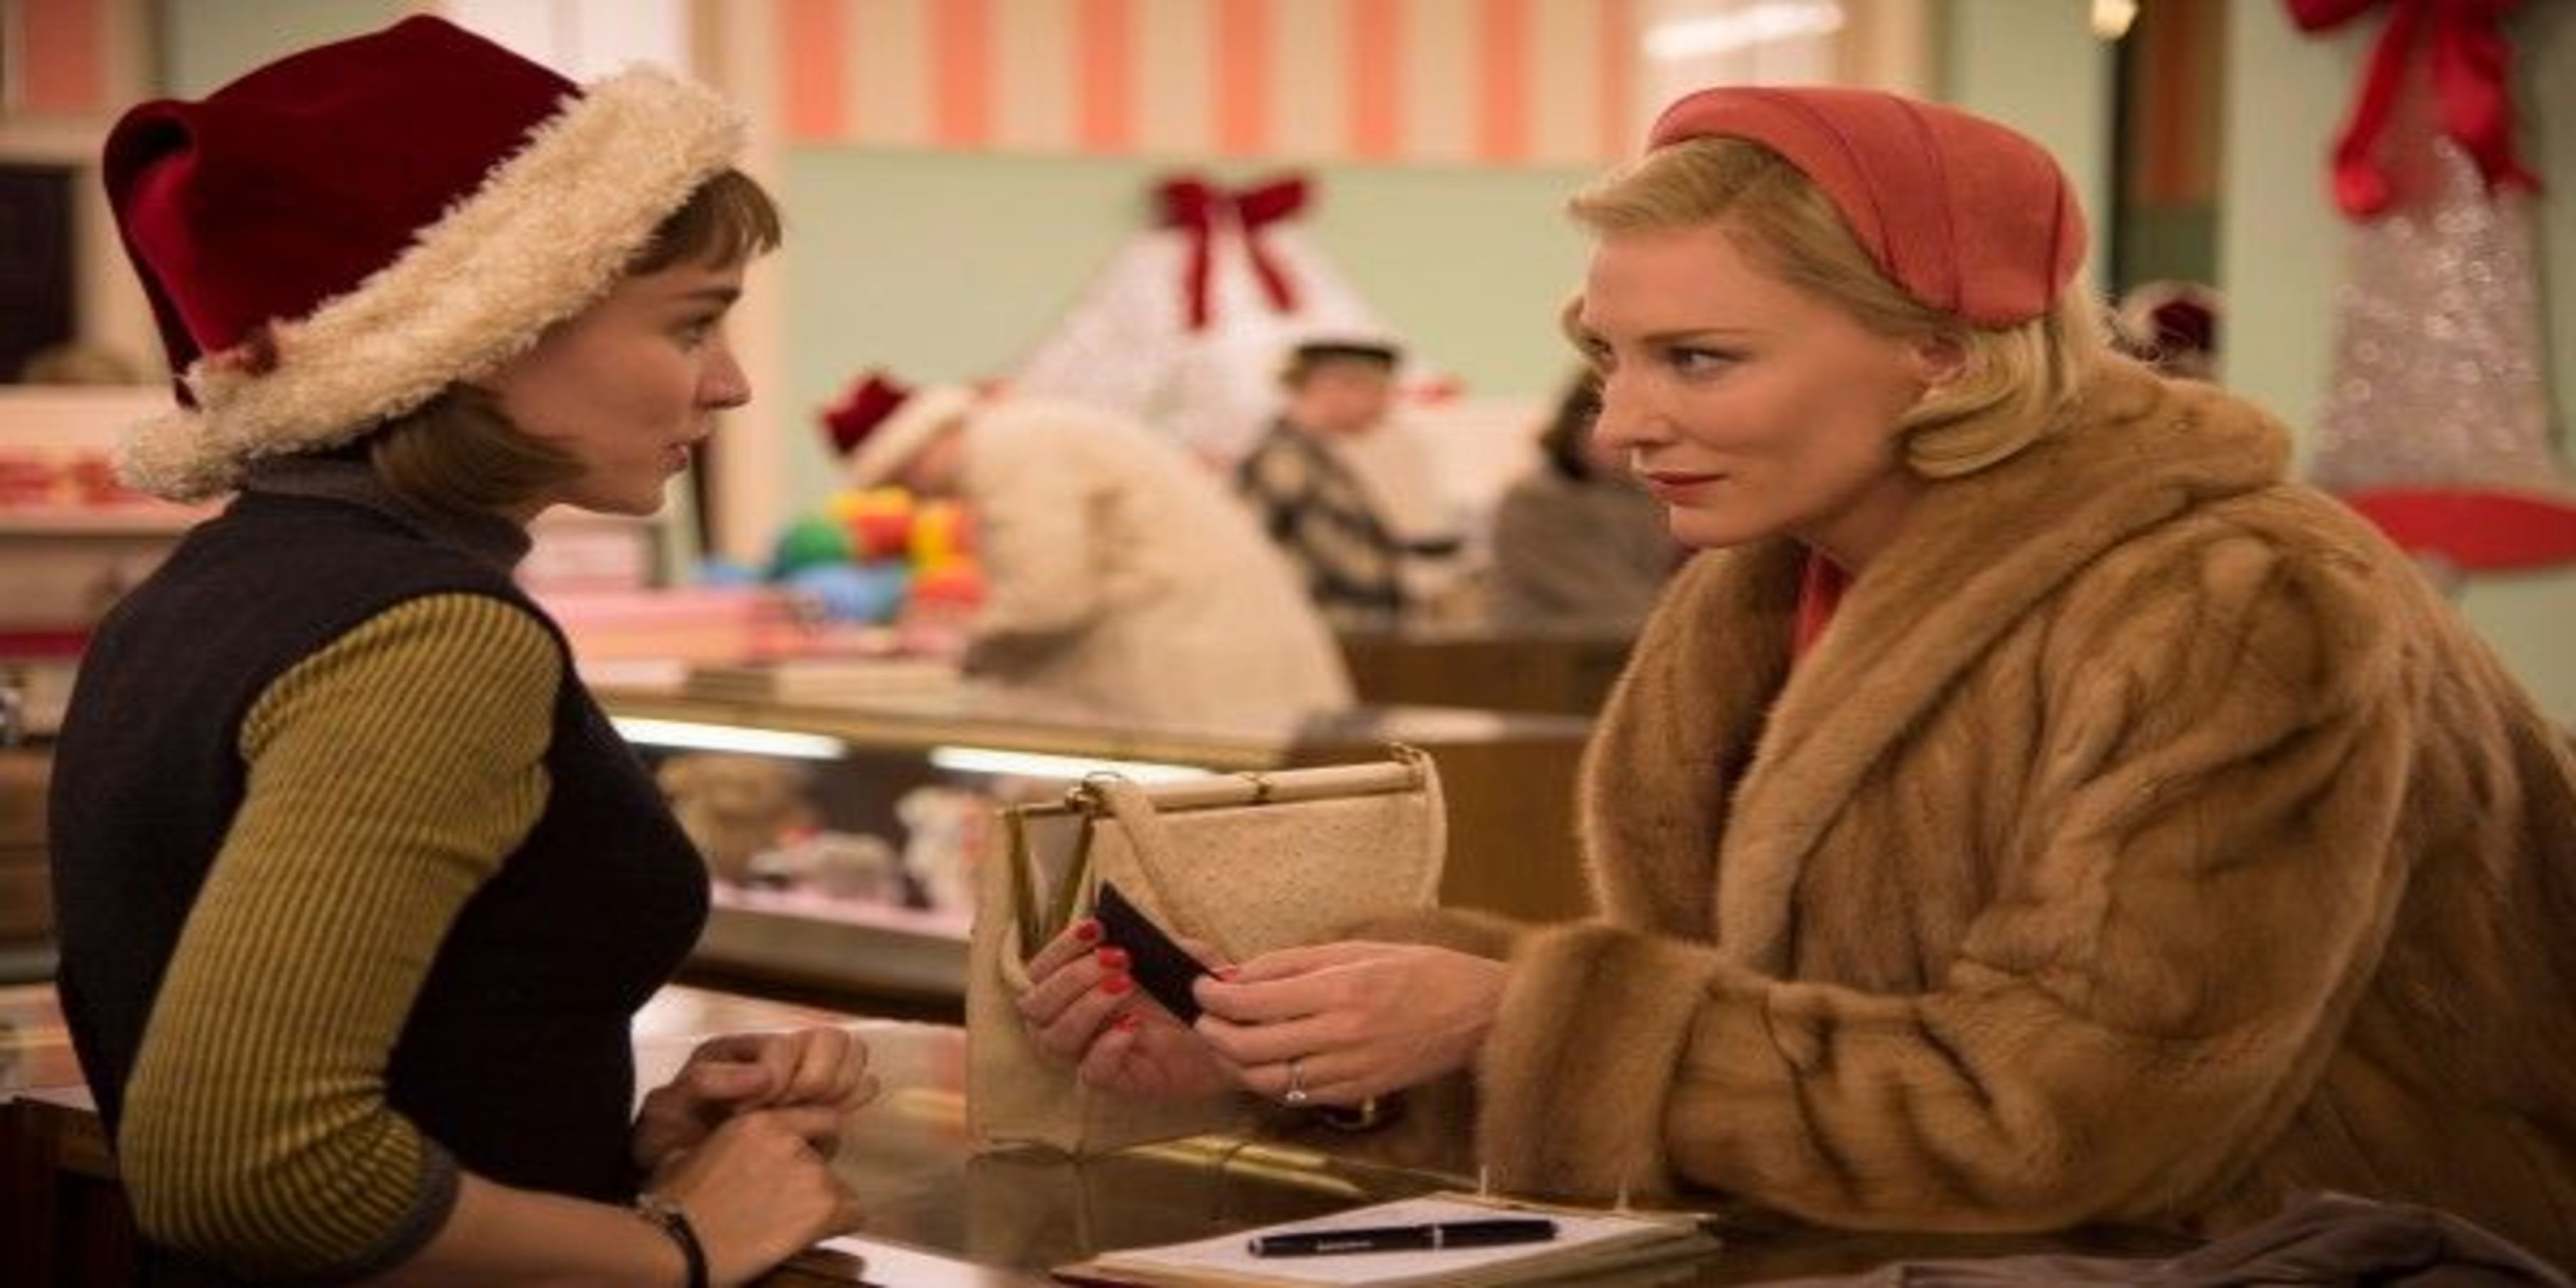 Cate Blanchet's Carol Aird and Rooney Mara's Therese Belivet in Carol